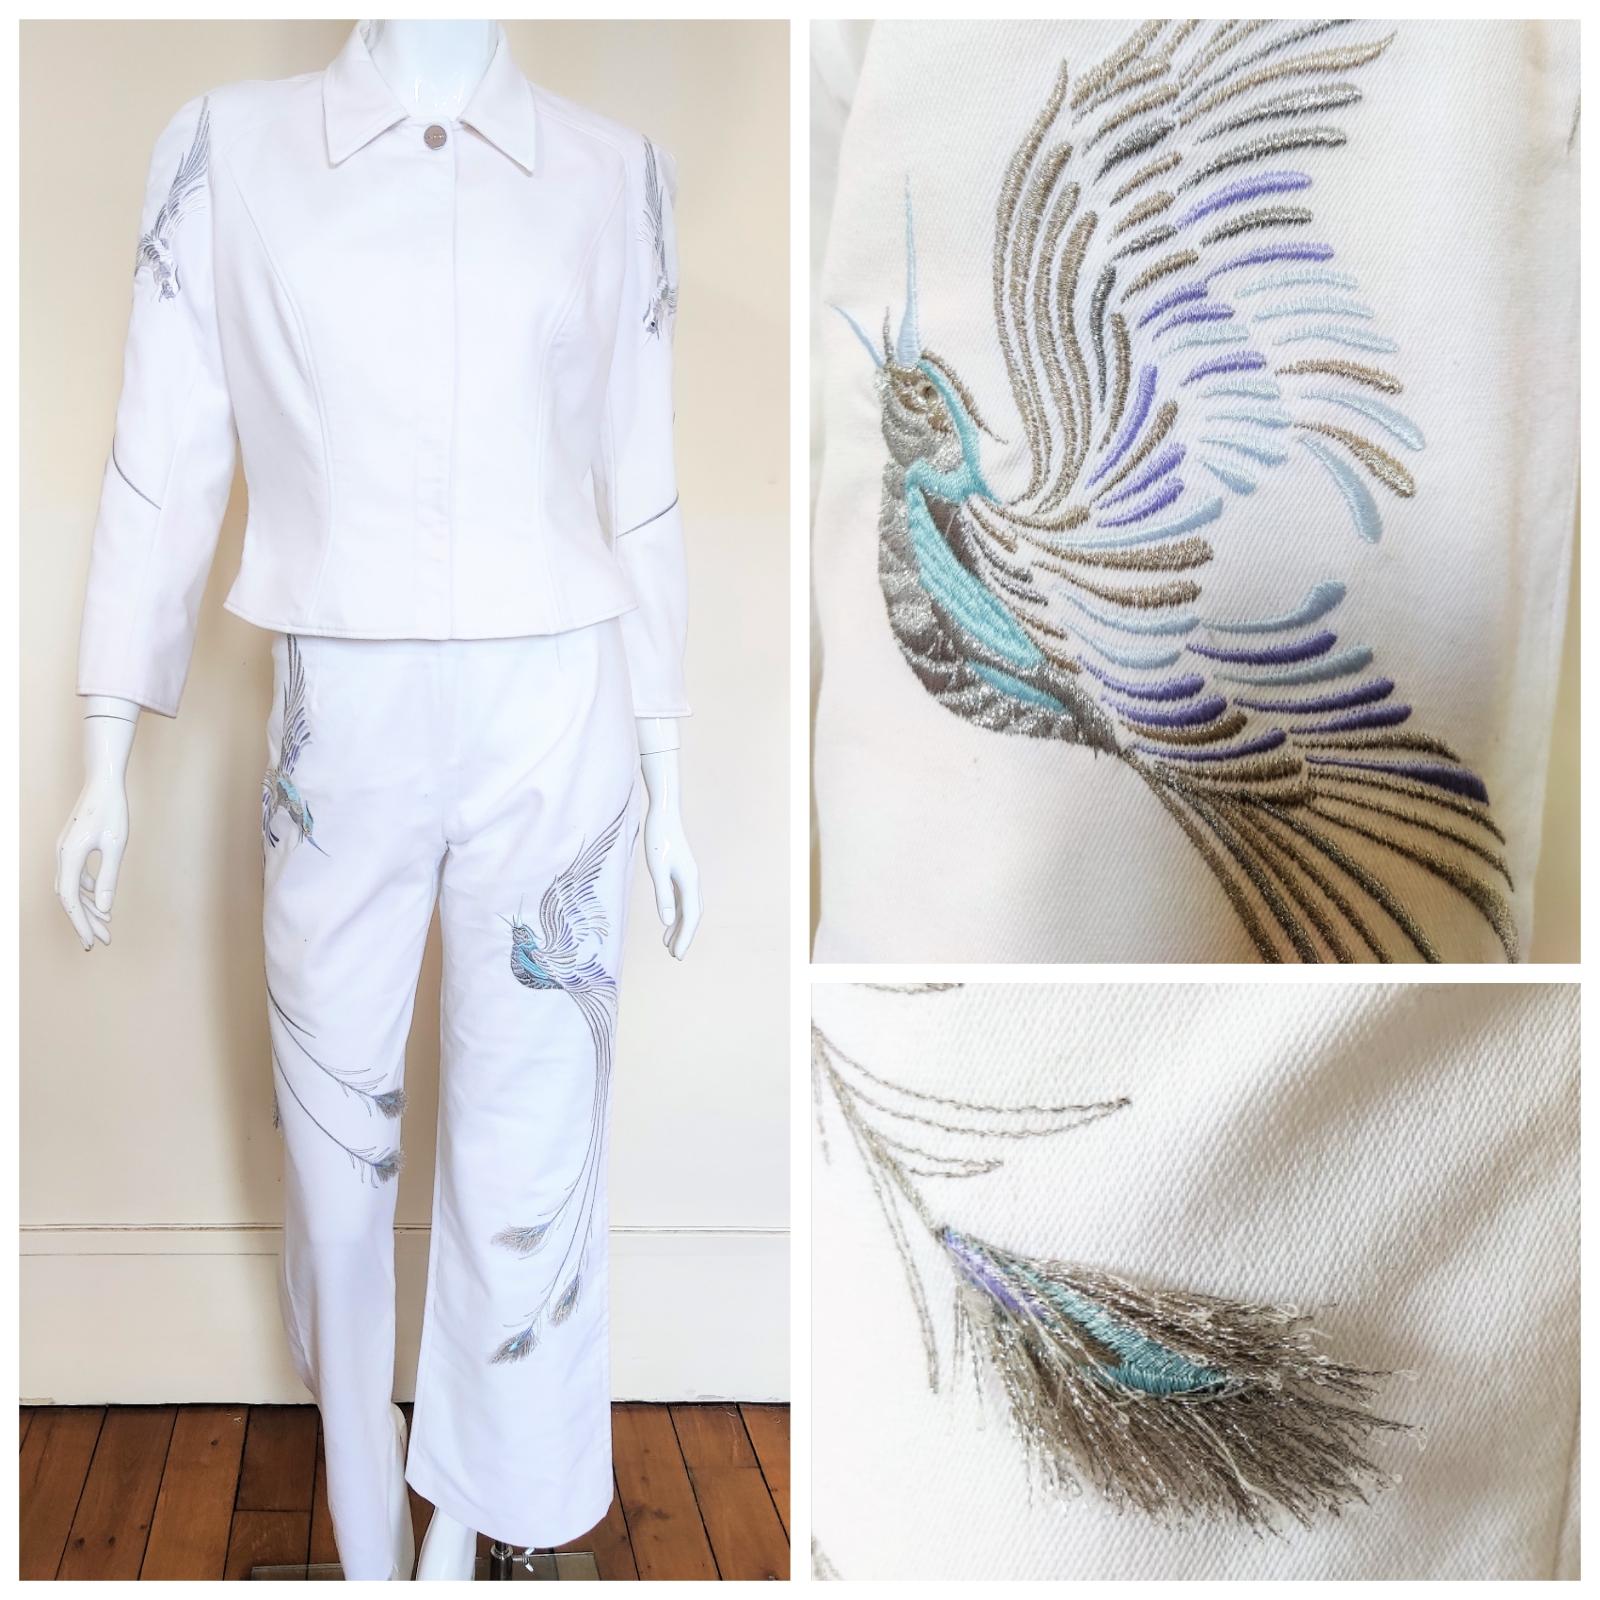 Emboidered birds and peacock feathers. You can touch the 3D feathers :)
Mugler button.

LIKE NEW! condition.

SIZE
Medium.
Please, read the measurements.

JACKET
Medium. No size label. 
Length: 50 cm / 19.7 inch
Bust: 49 cm / 19.3 inch
Waist: 40 cm